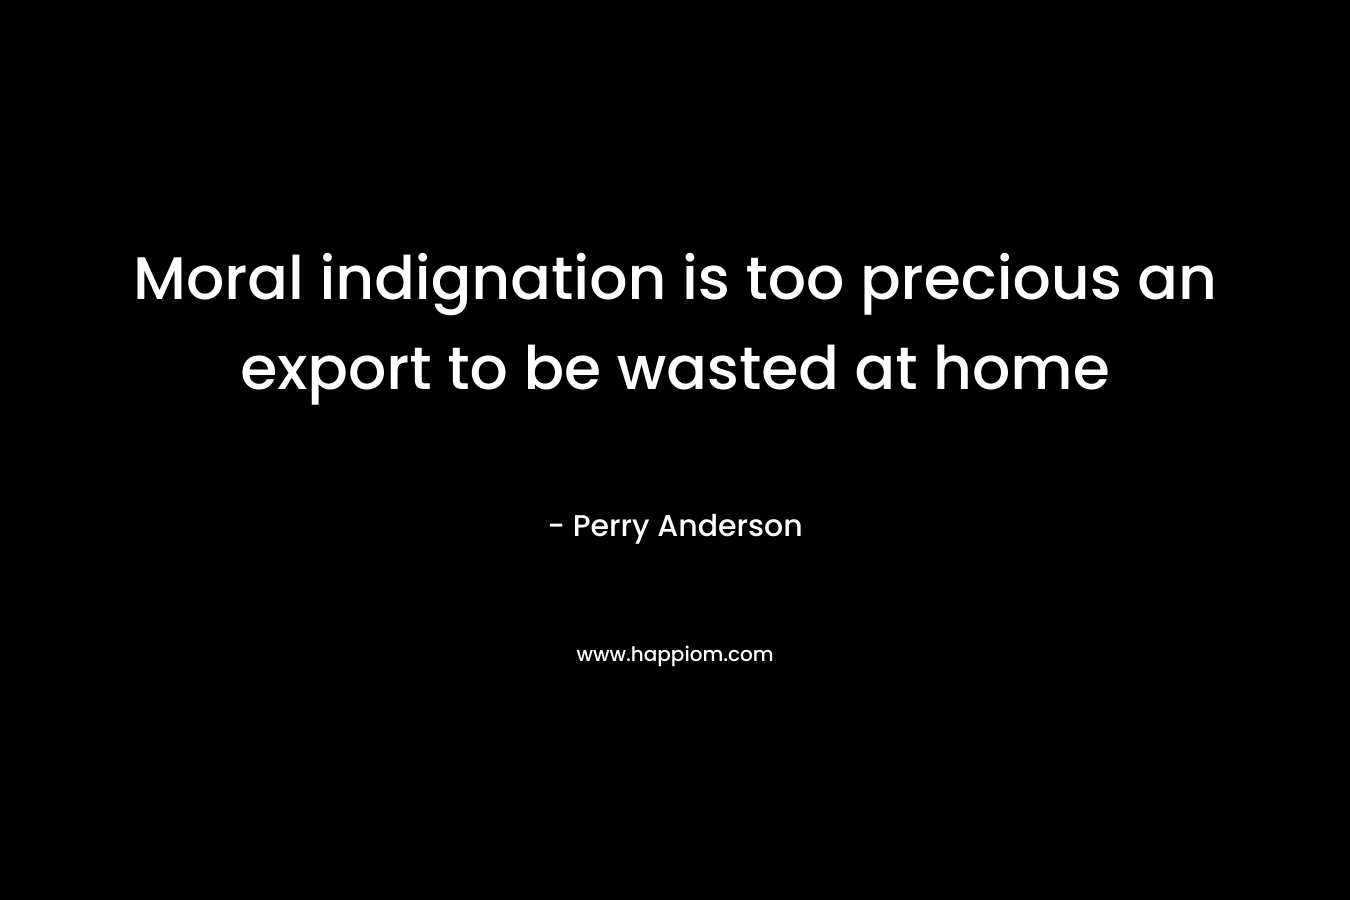 Moral indignation is too precious an export to be wasted at home – Perry Anderson